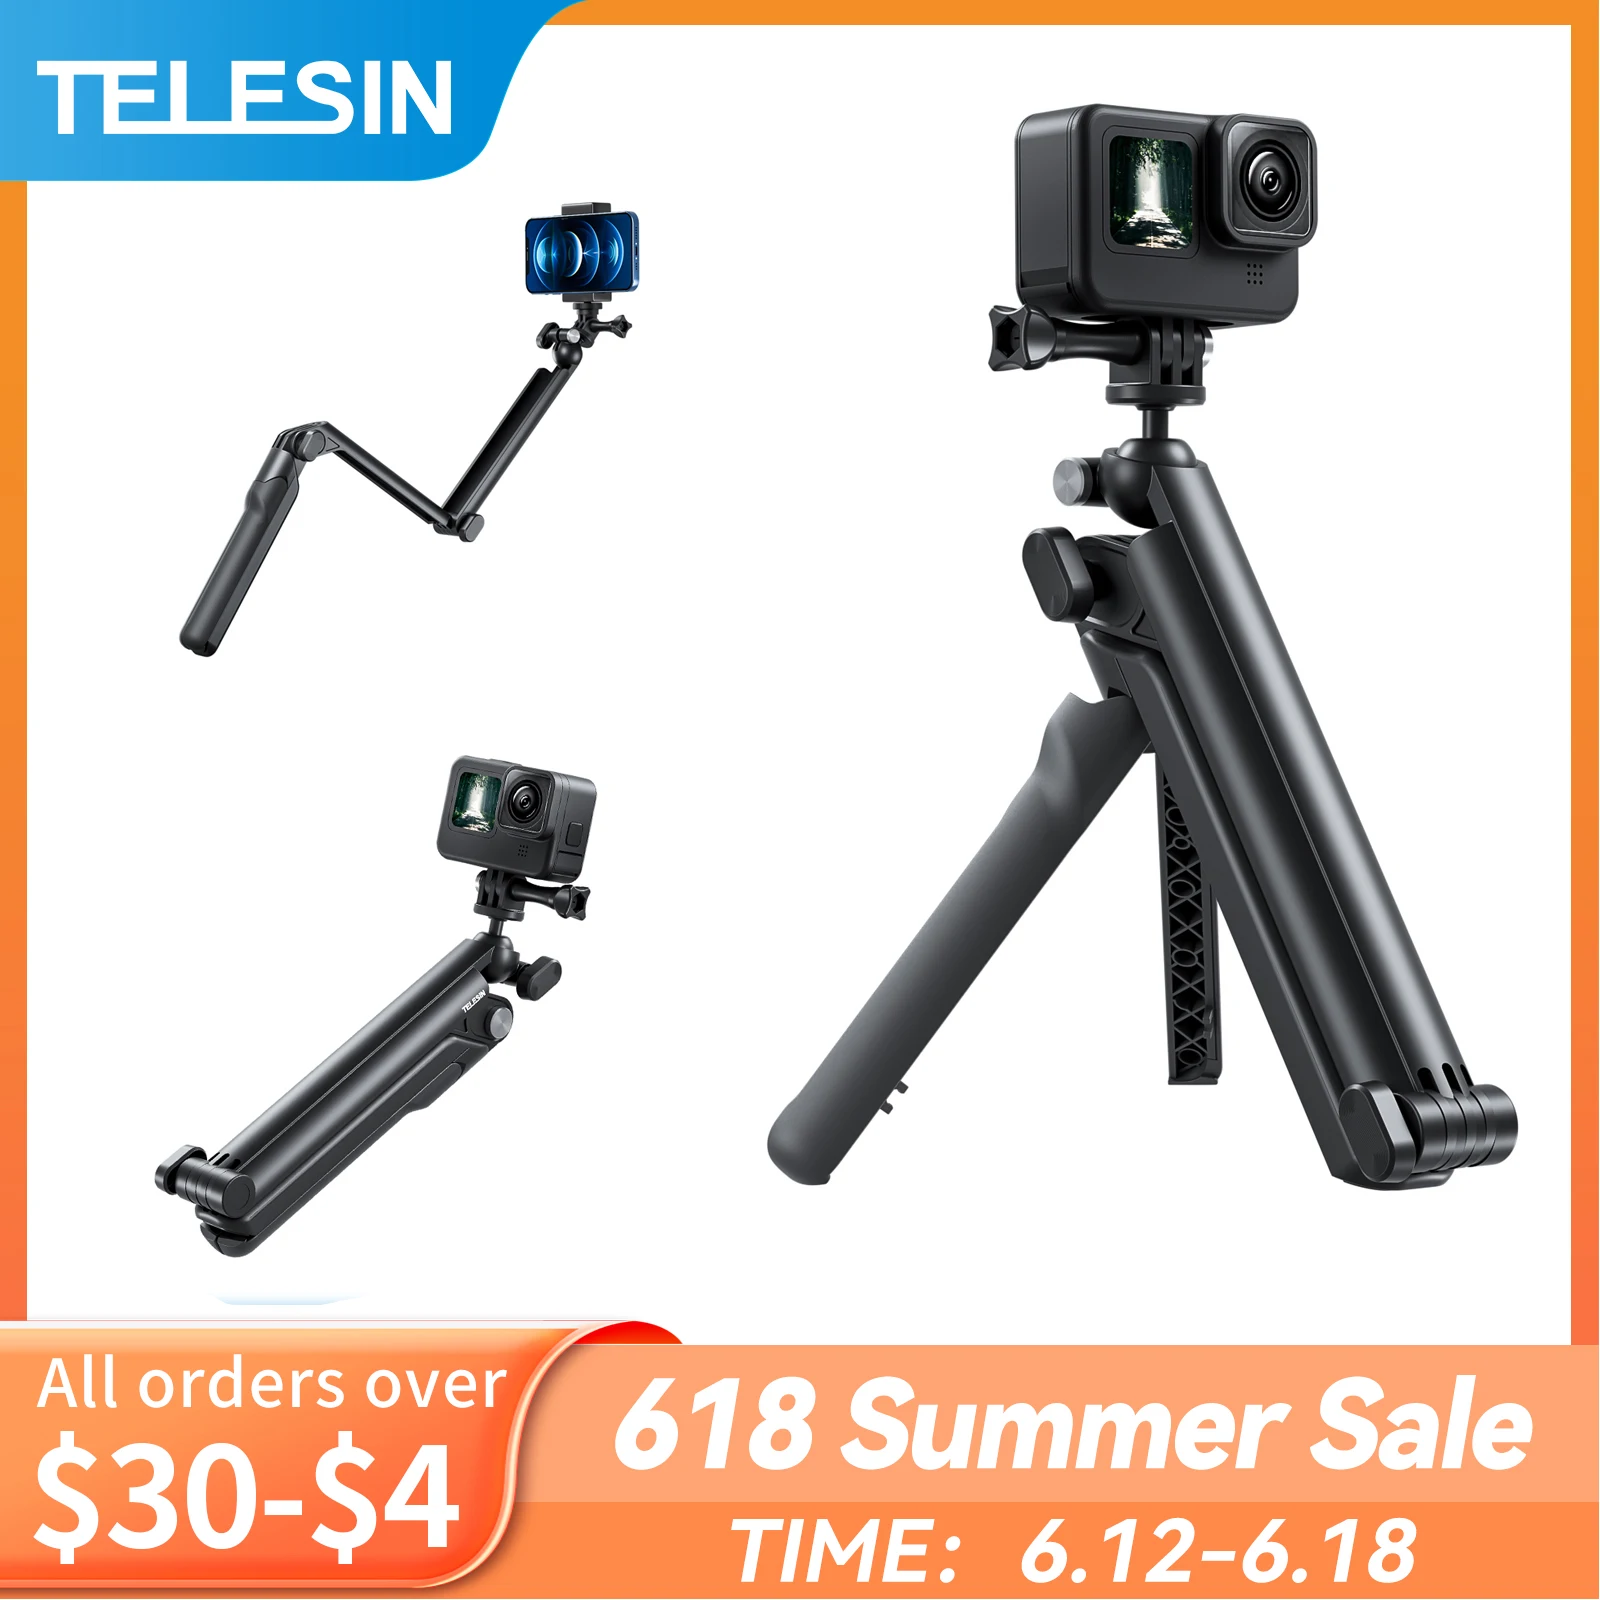 TELESIN 3 ways Selfie Stick with Tripod Hand Grip Pole for GoPro Hero Insta360 DJI Action Smart Phone Action Camera Accessories